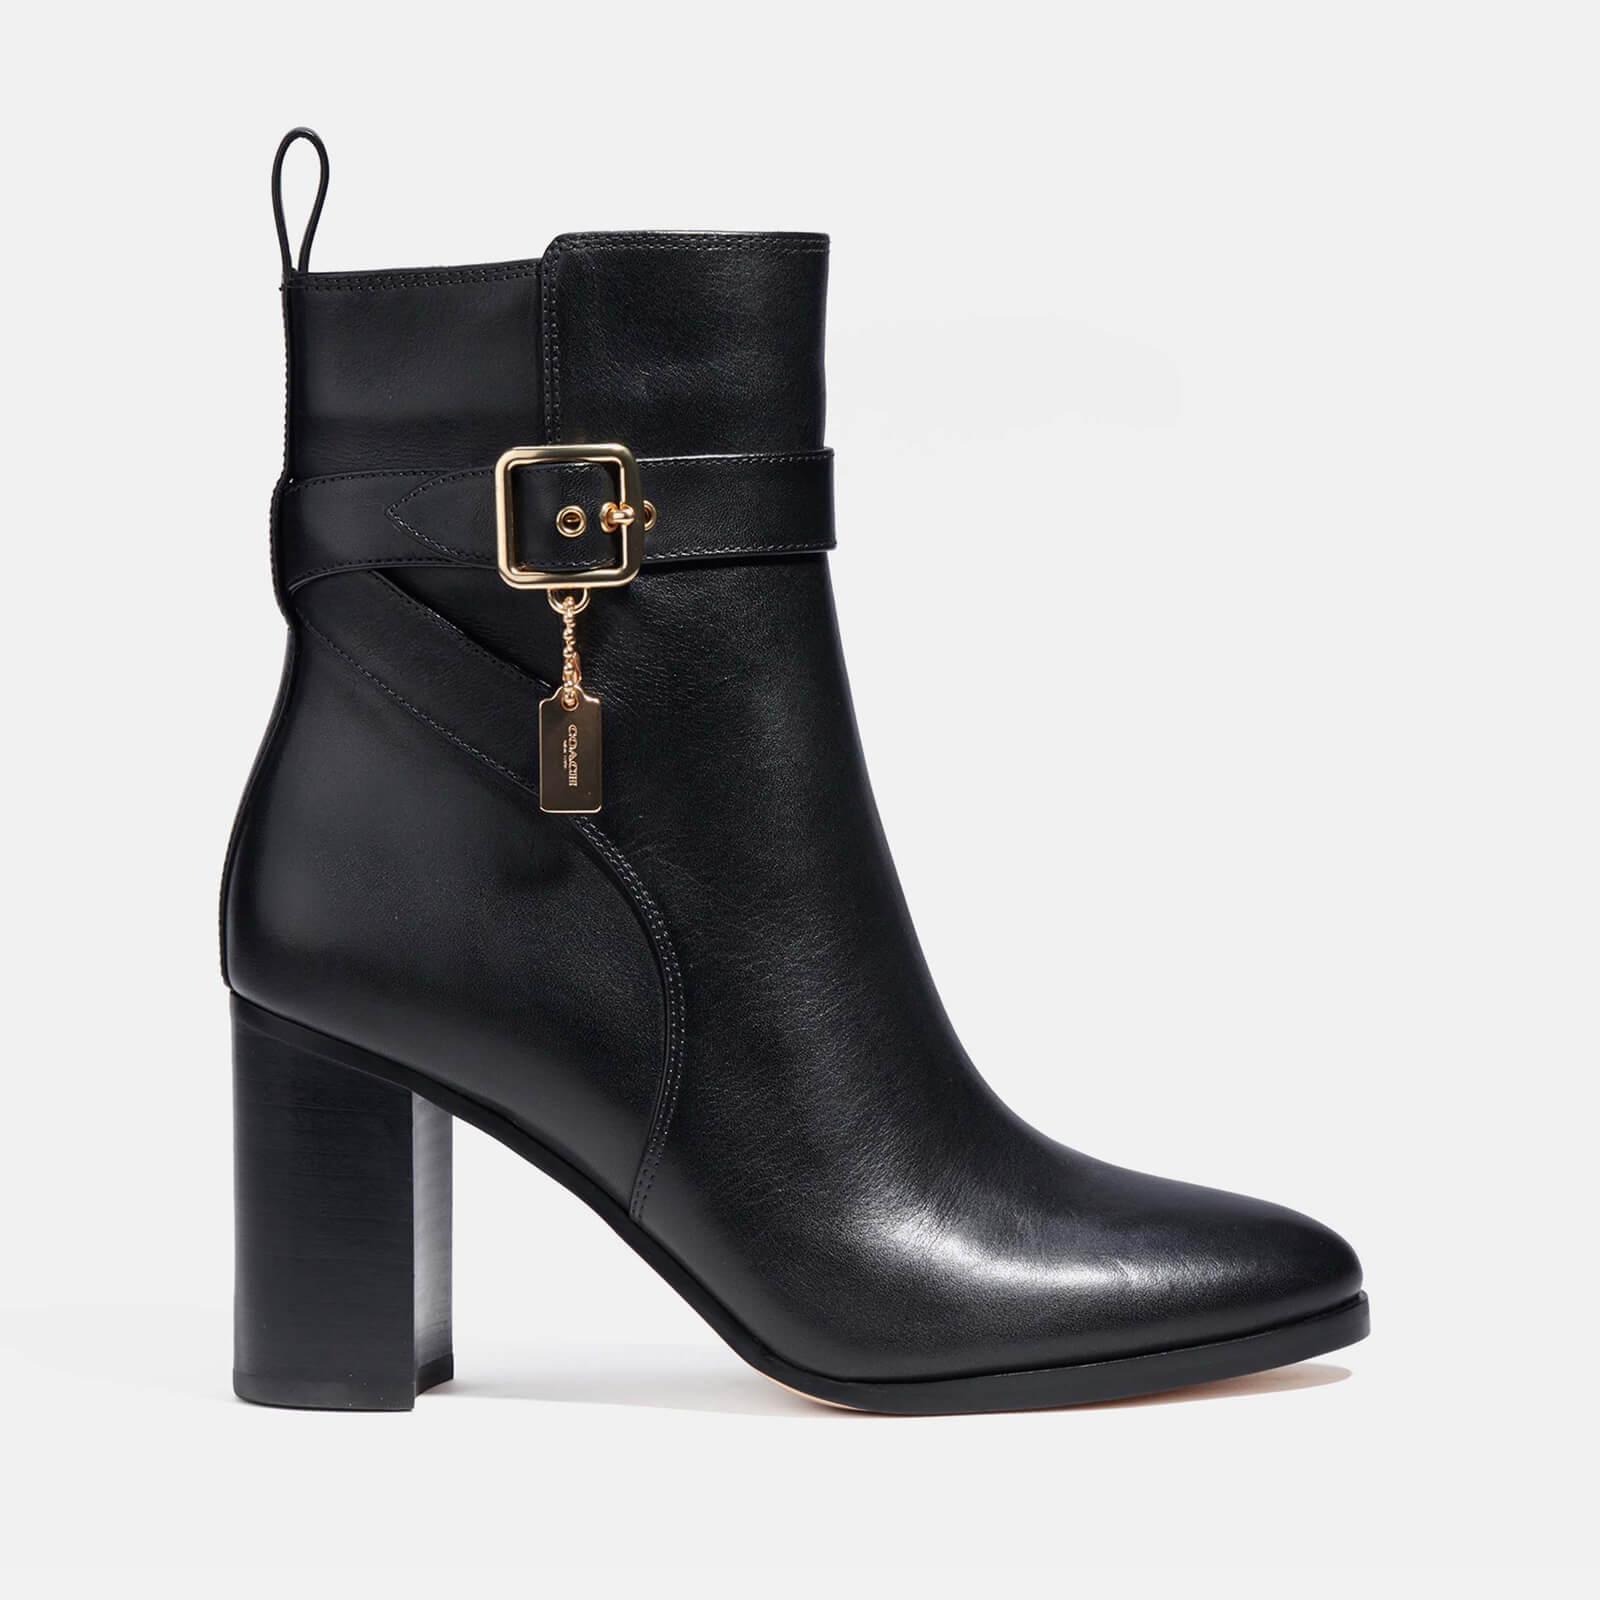 COACH Olivia Leather Heeled Boots in Black | Lyst